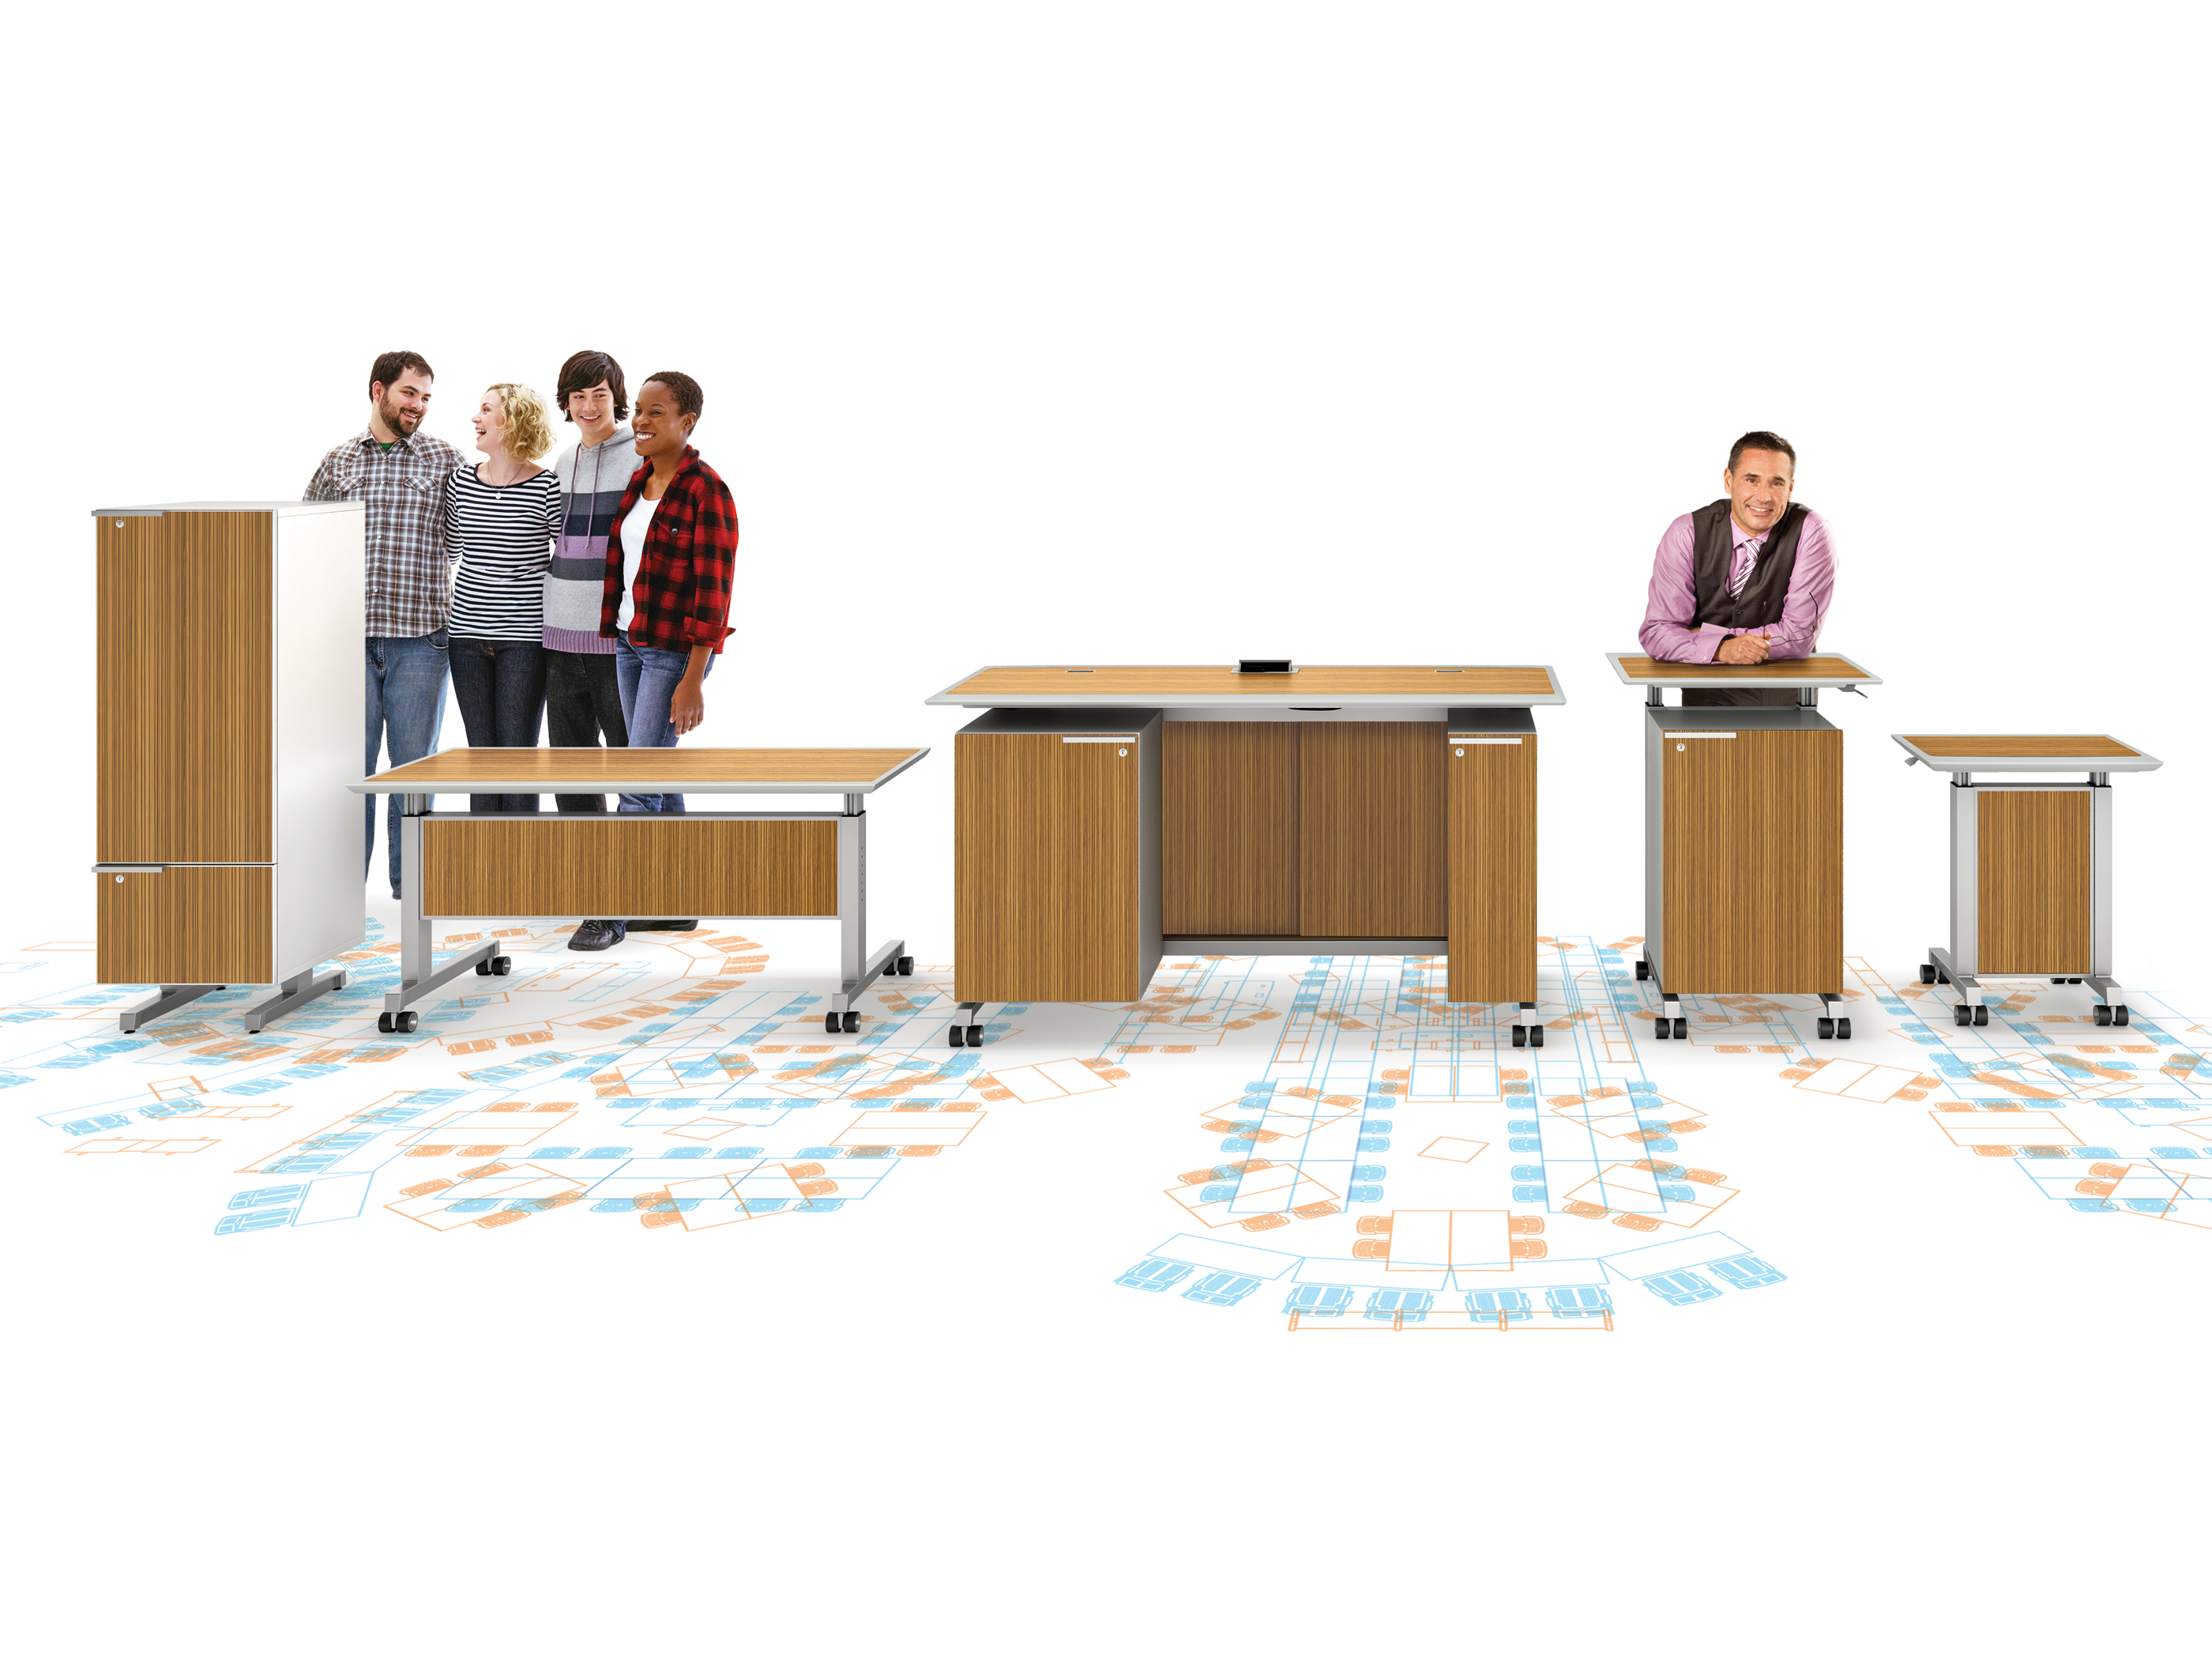 Dewey by SurfaceWorks varied tables and lecterns in wooden laminate with SurfaceWorks team